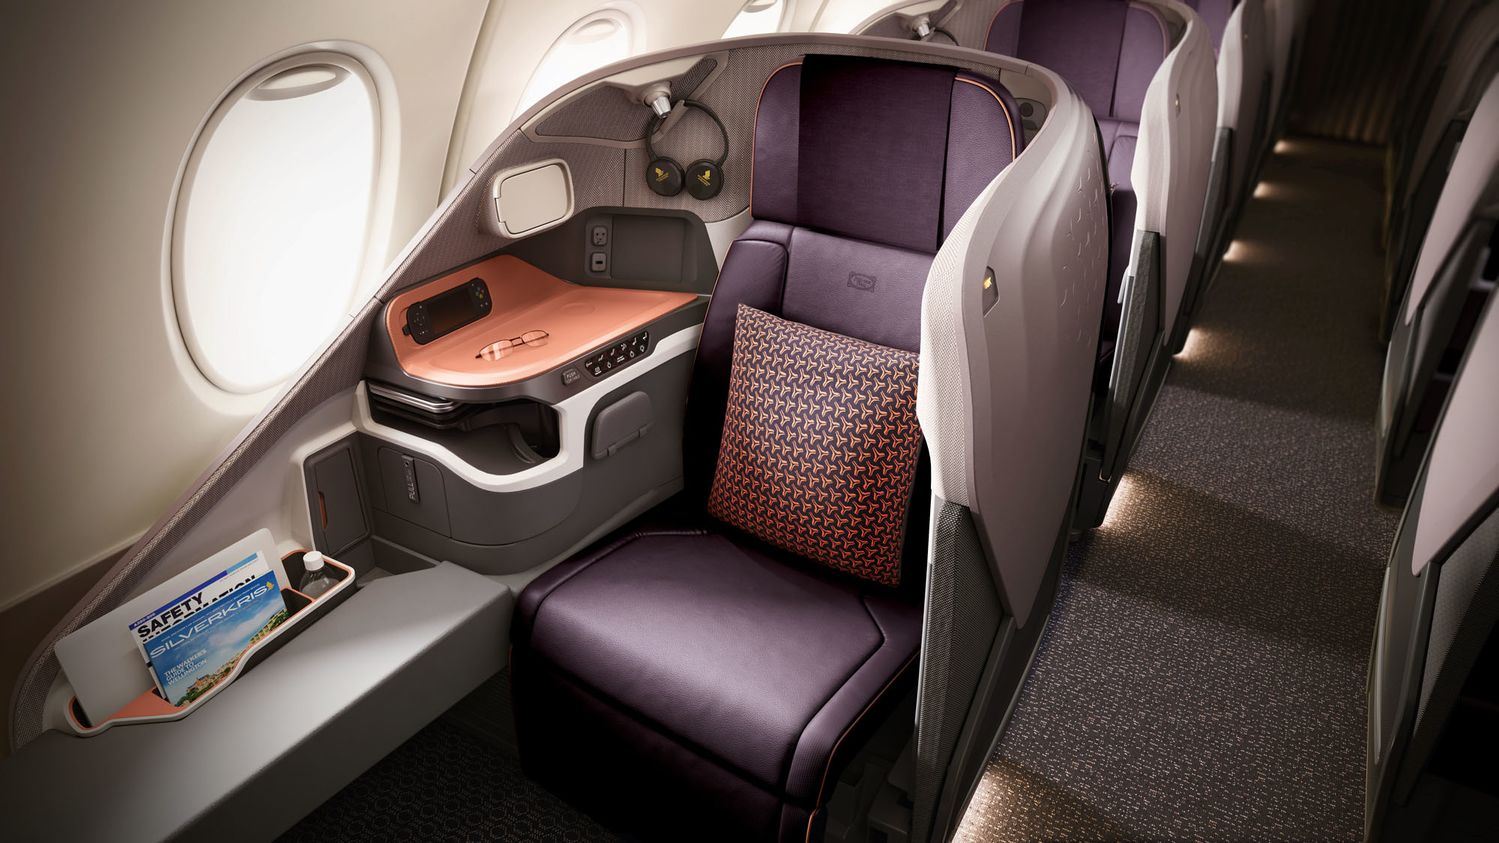 First photos: Singapore Airlines' new Airbus A380 business class